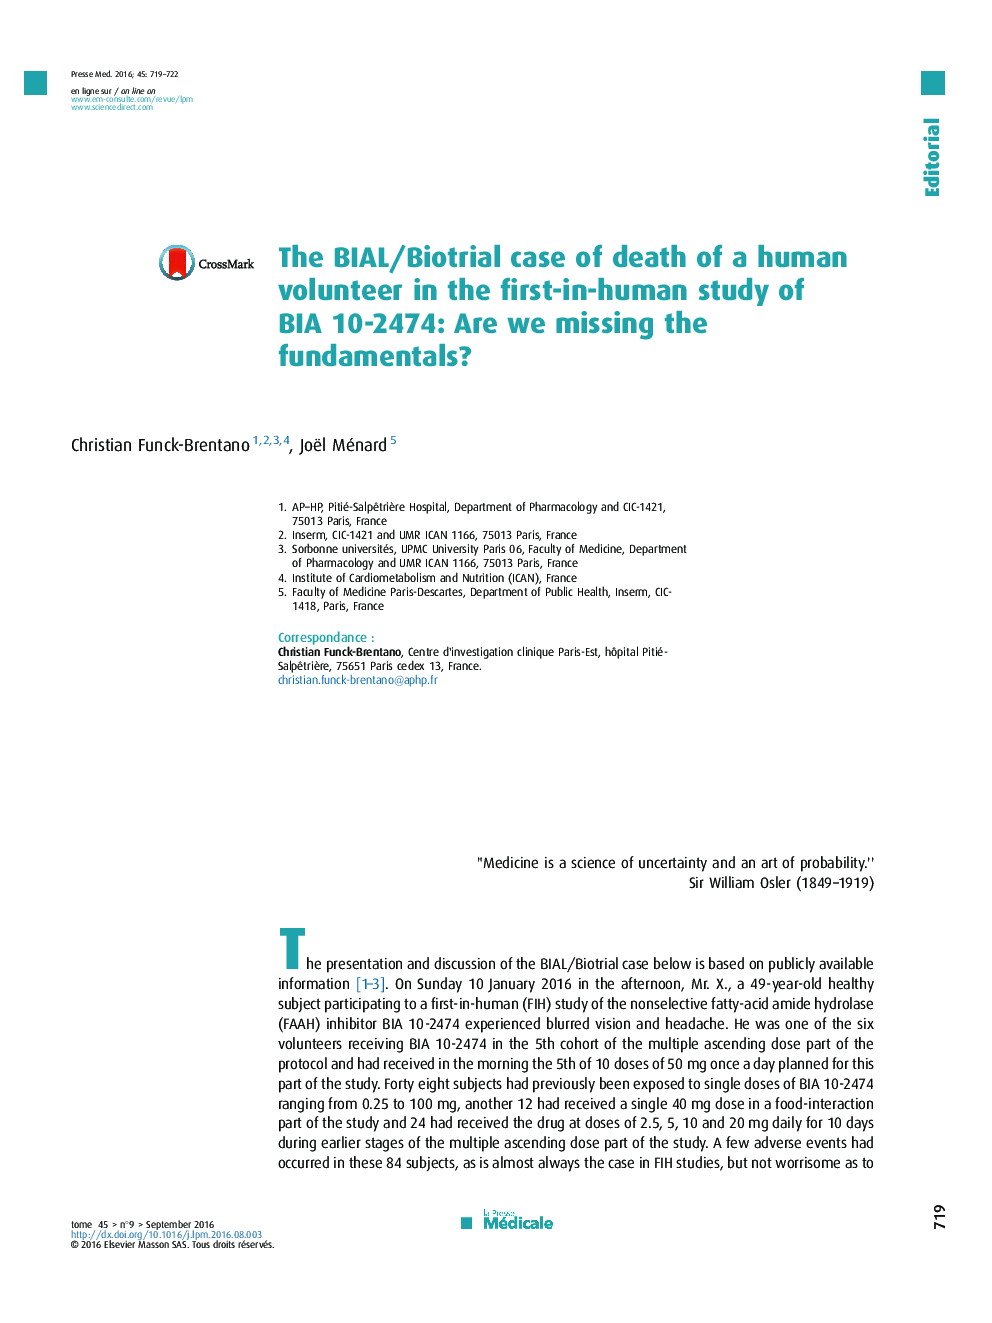 The BIAL/Biotrial case of death of a human volunteer in the first-in-human study of BIAÂ 10-2474: Are we missing the fundamentals?